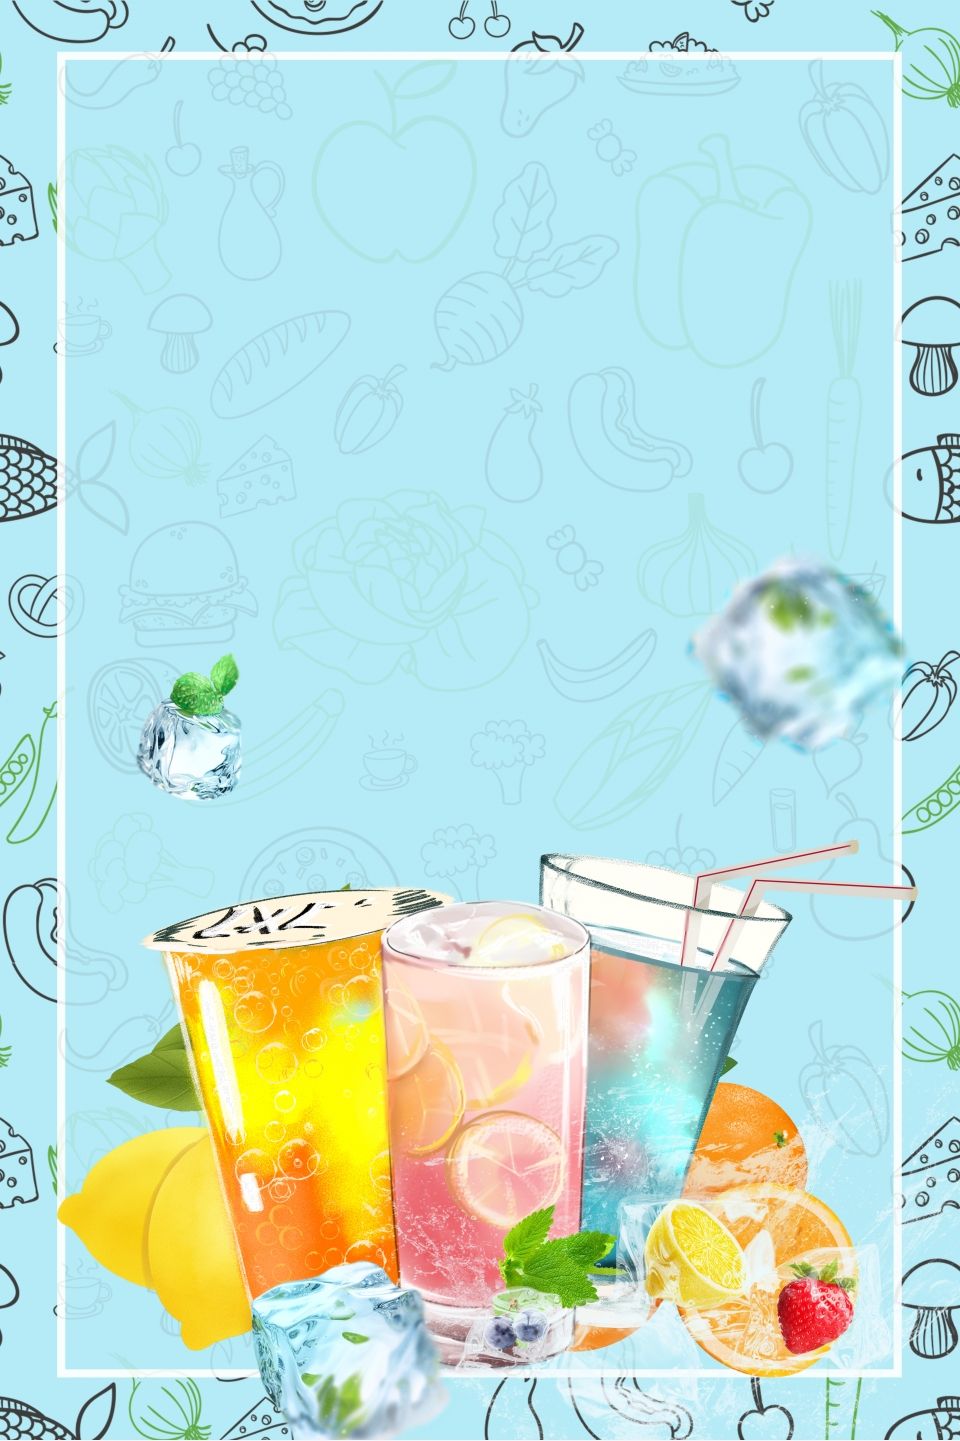 Blue Fresh Summer Ice Drink Poster Background Material, Cool